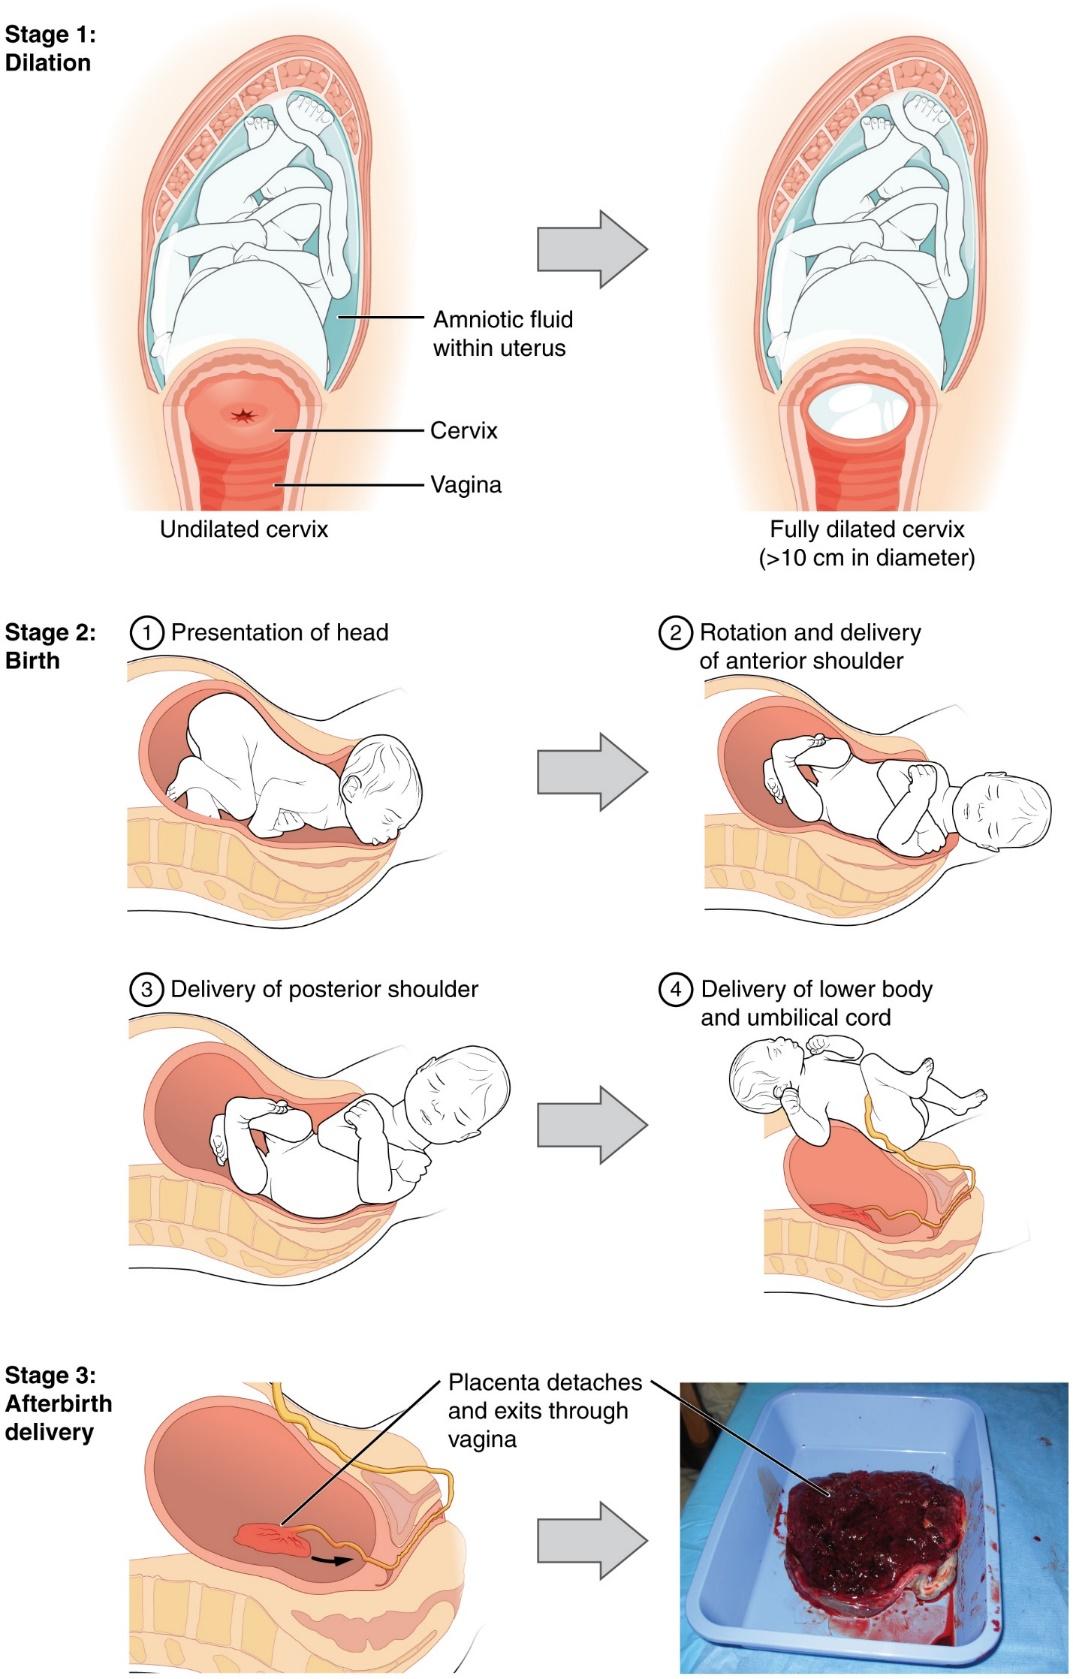 Stage 3, delivery of the placenta and associated fetal membranes